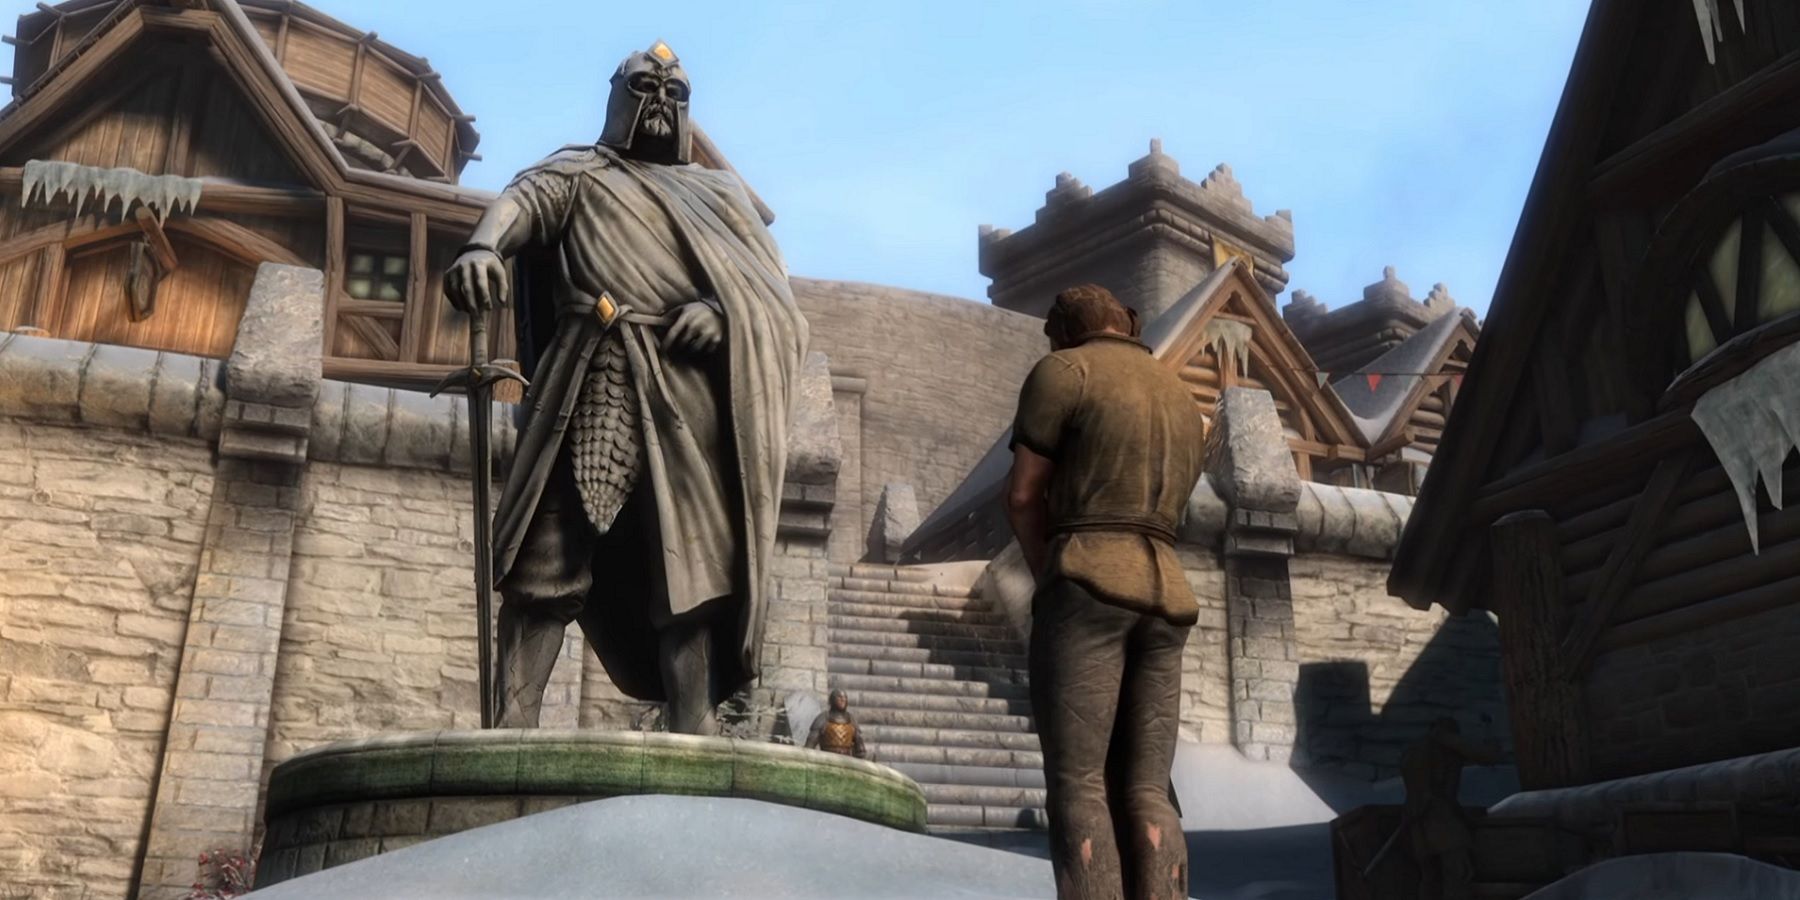 Screenshot from the Oblivion mod Skyblivion, showing someone looking at the Talos statue in Bruma.